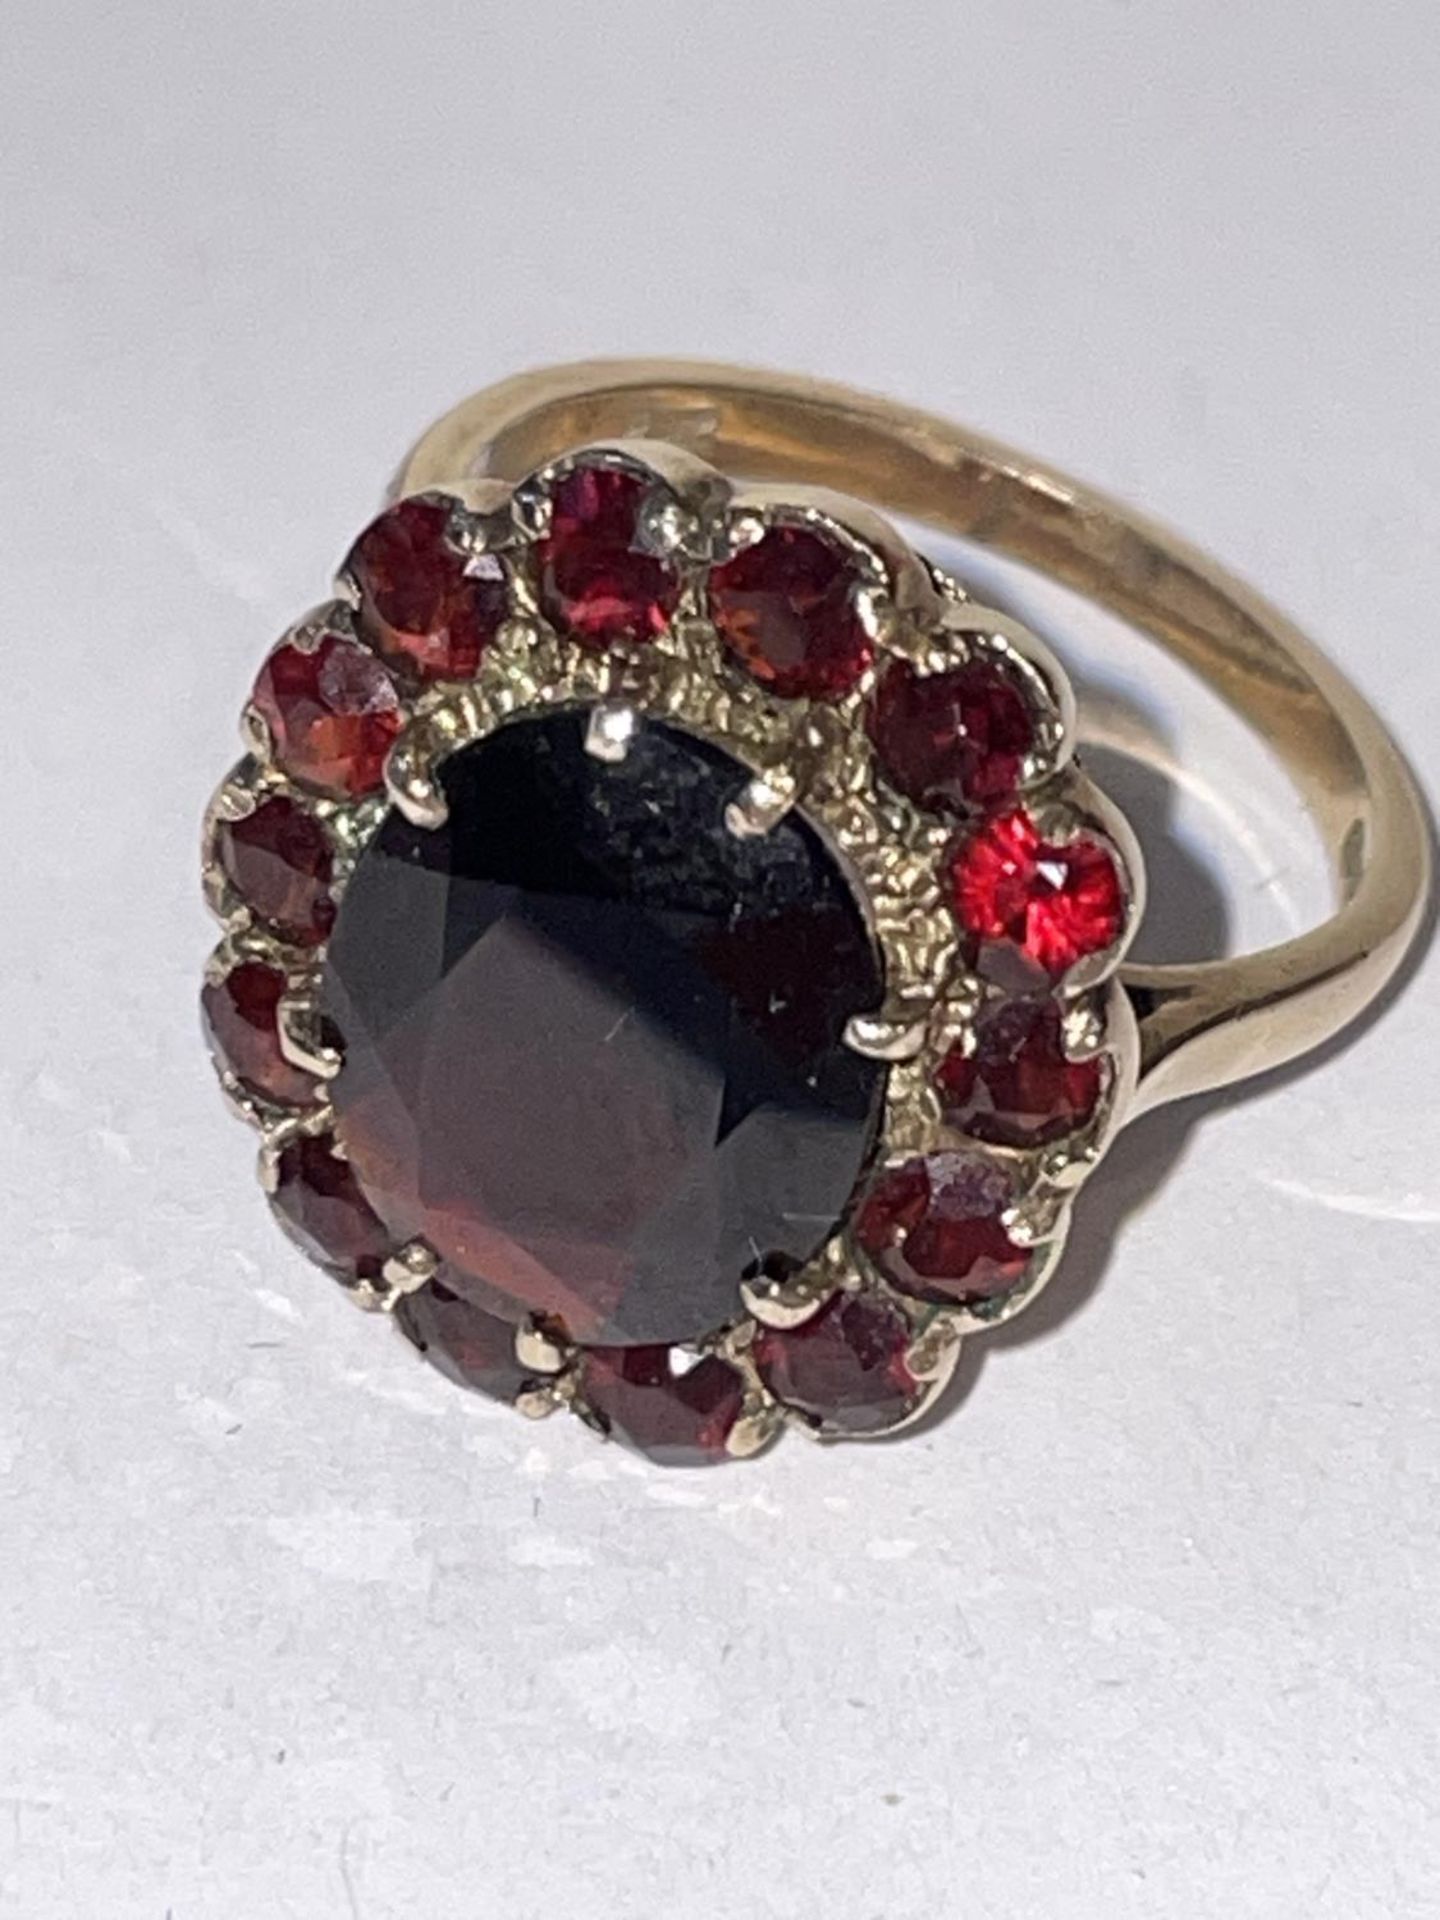 A 9CT YELLOW GOLD AND GARNET RING IN A FLOWER DESIGN SIZE P, WEIGHT 5.46 GRAMS - Image 2 of 5